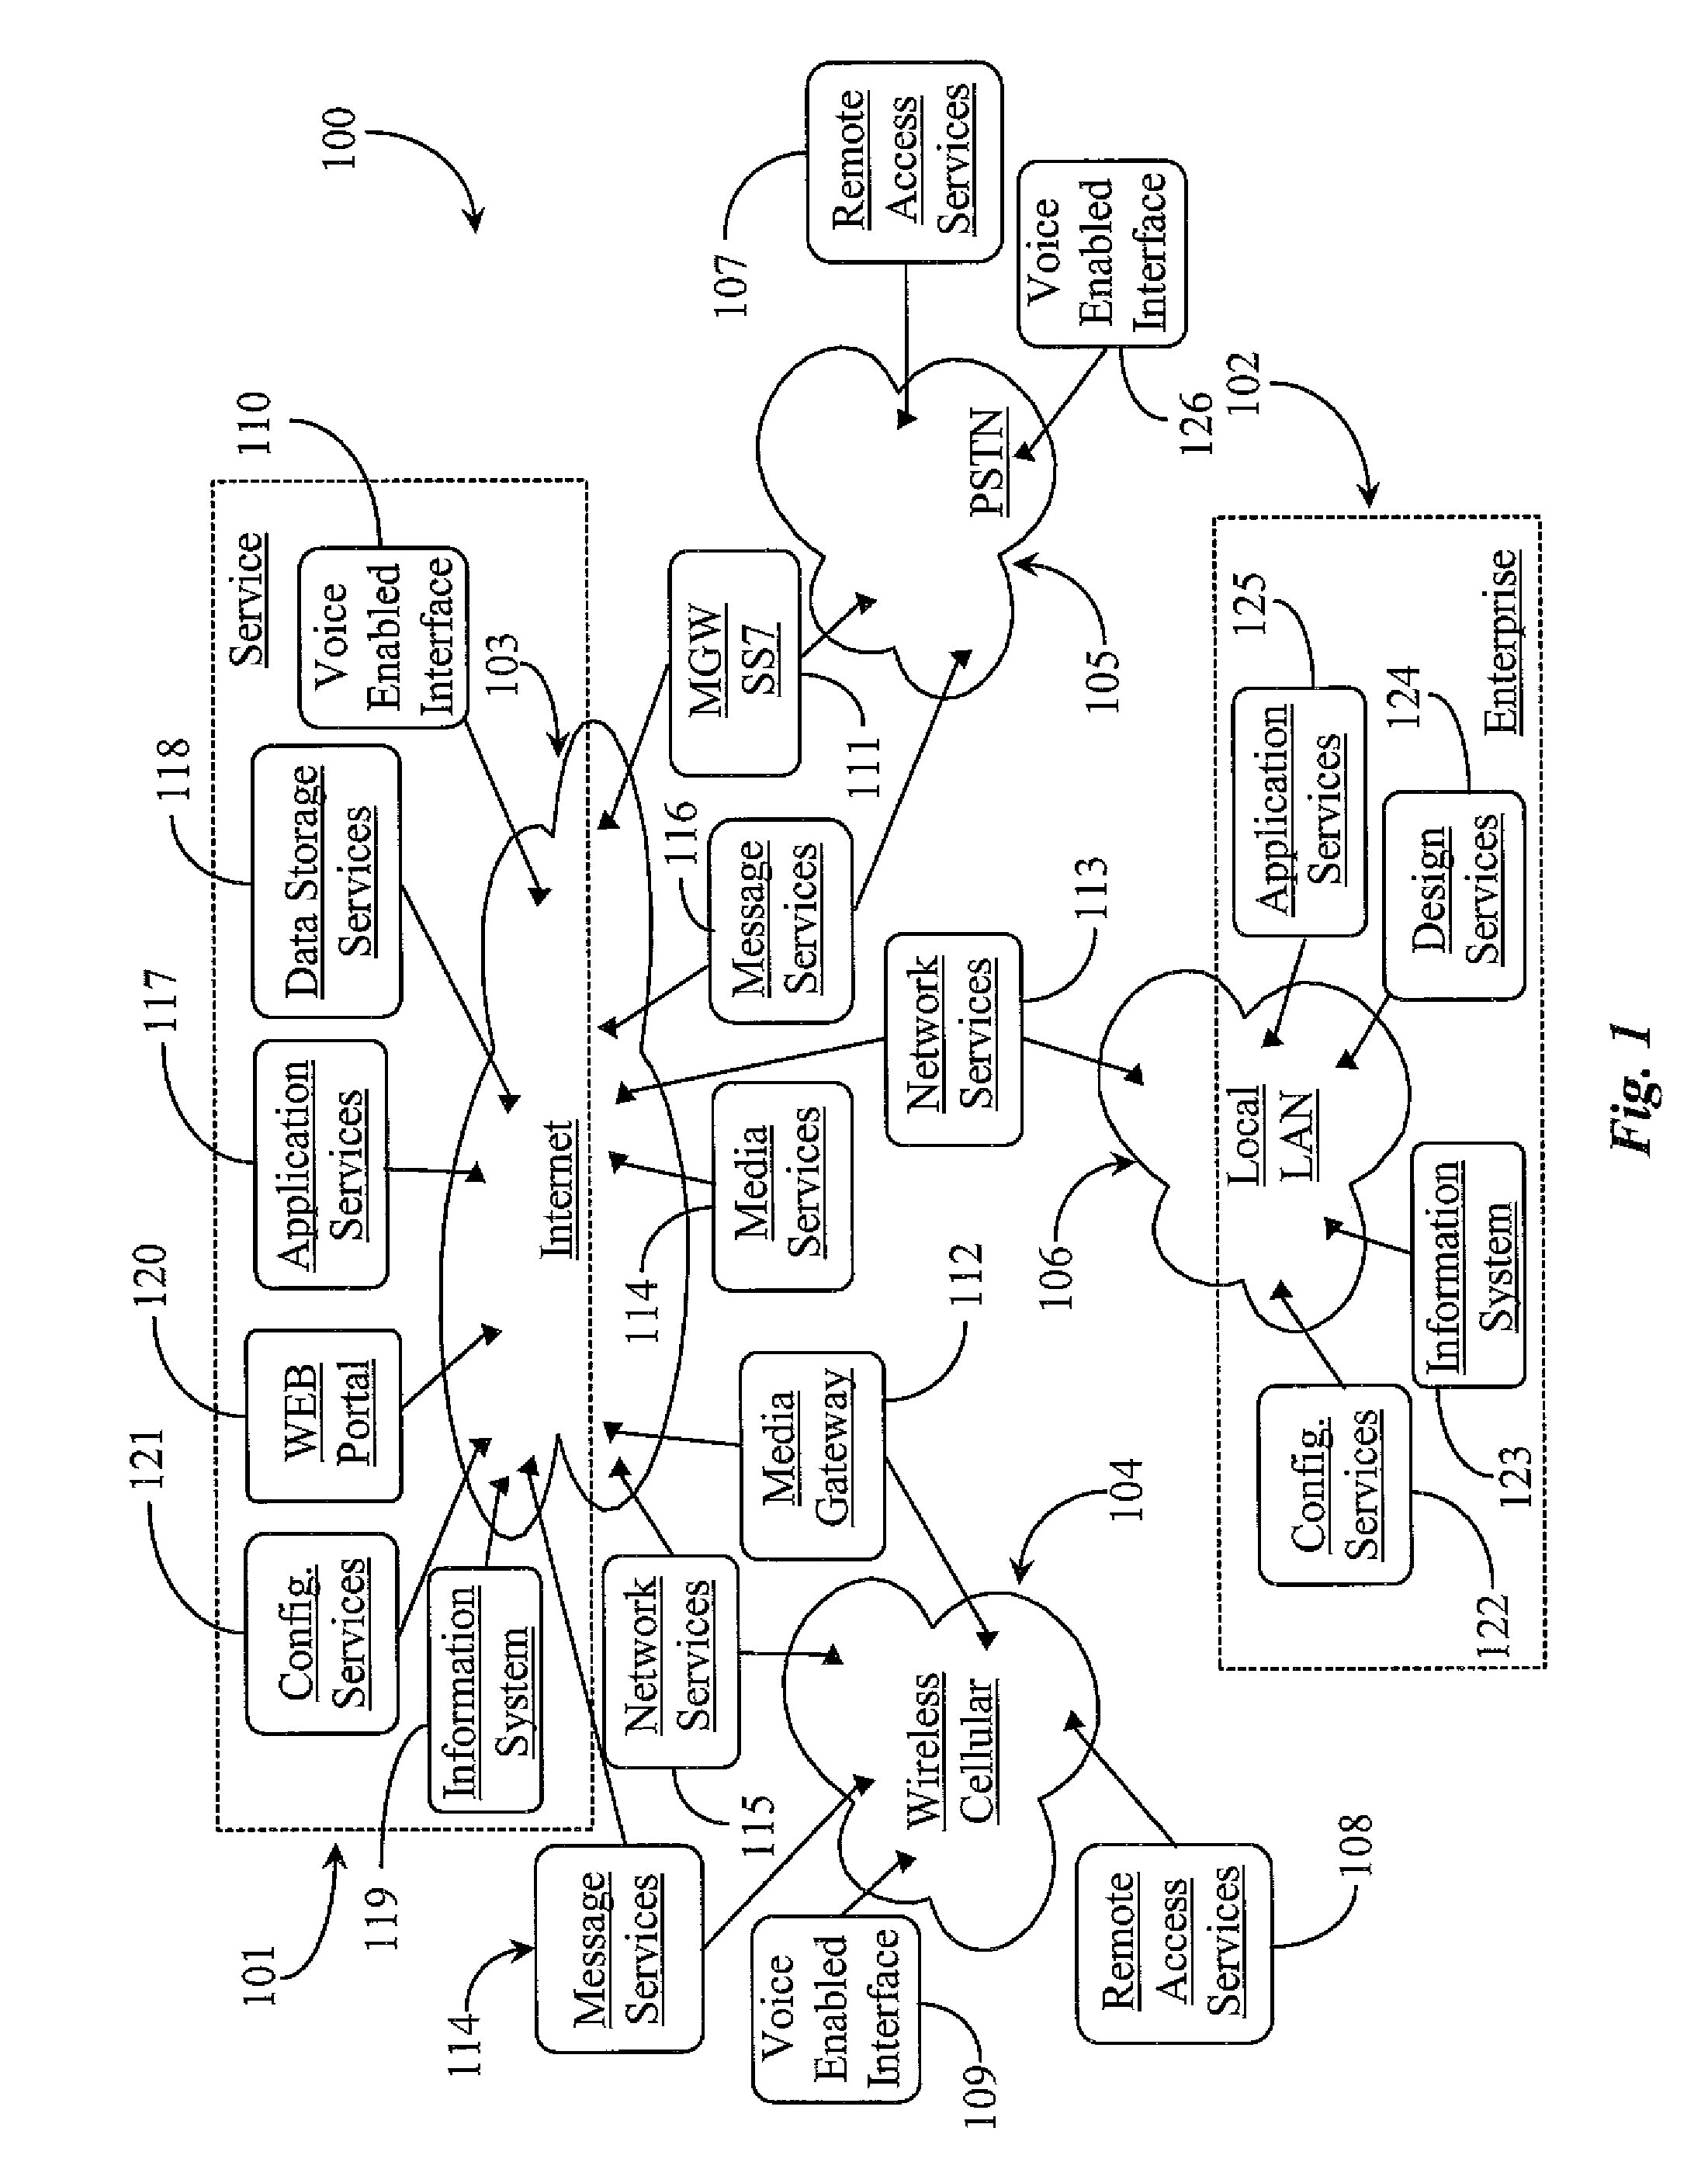 Distributive Real Time Information Dissemination and Information Gathering System and Service with Dynamically Harmonized Communication Channels